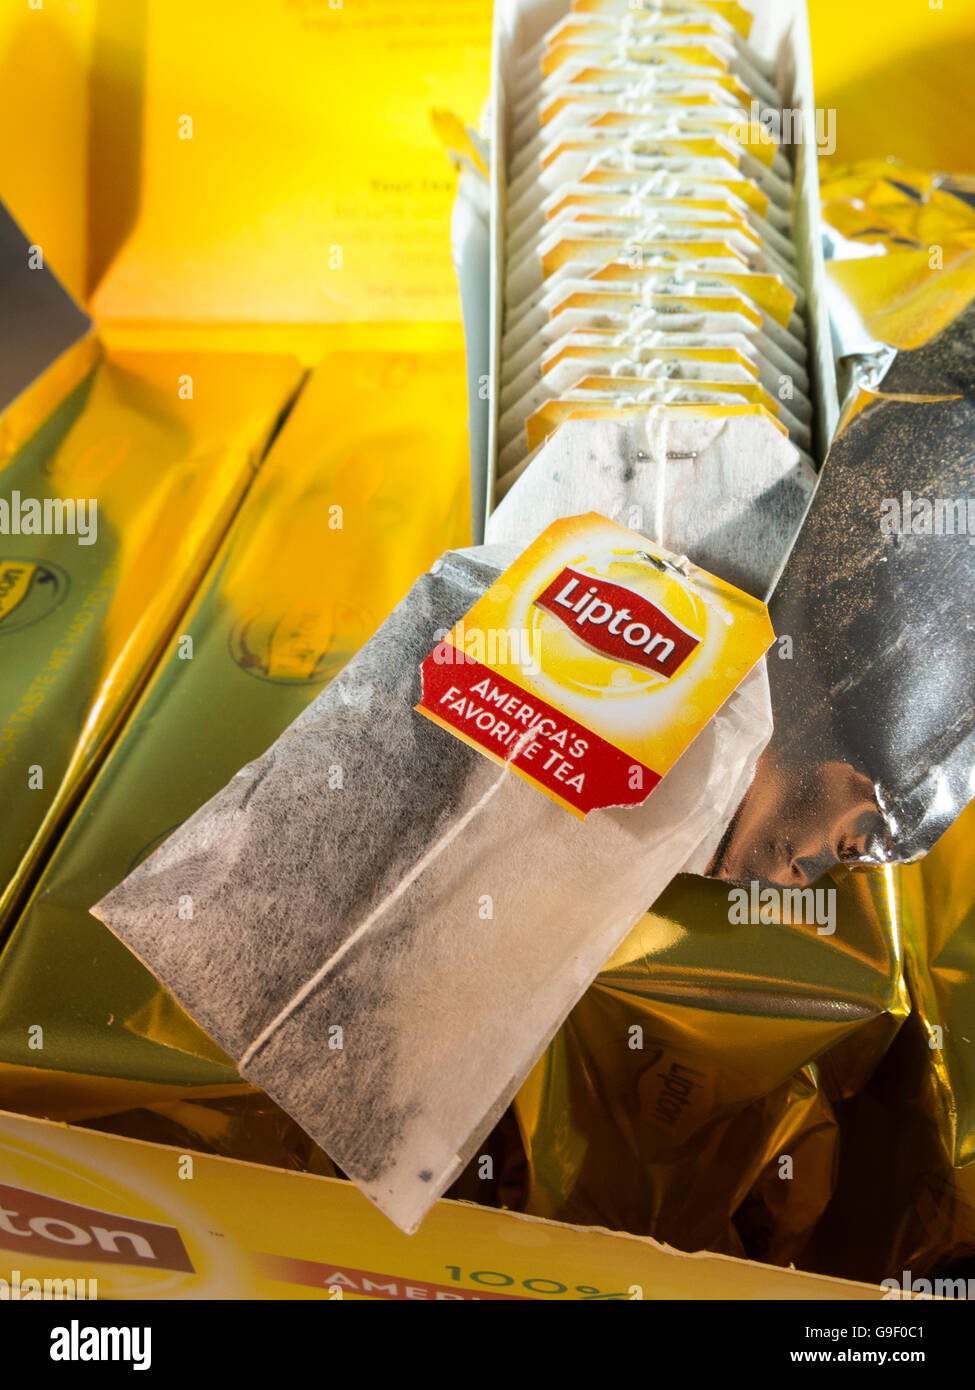 Lipton Teas & Infusions unveils 'quick brewing' teabag for PG Tips, News